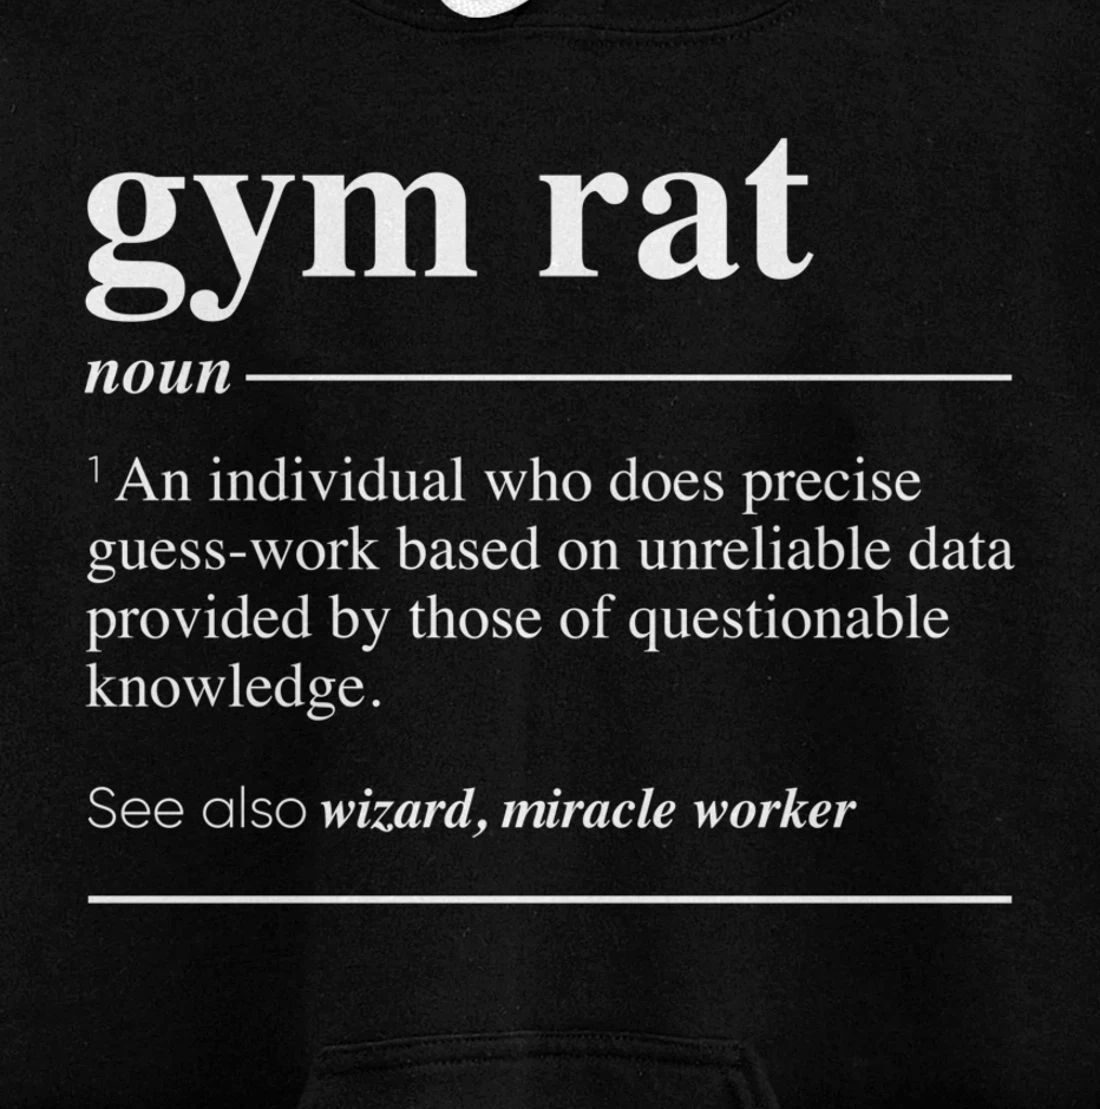 Gym rat - Definition, Meaning & Synonyms